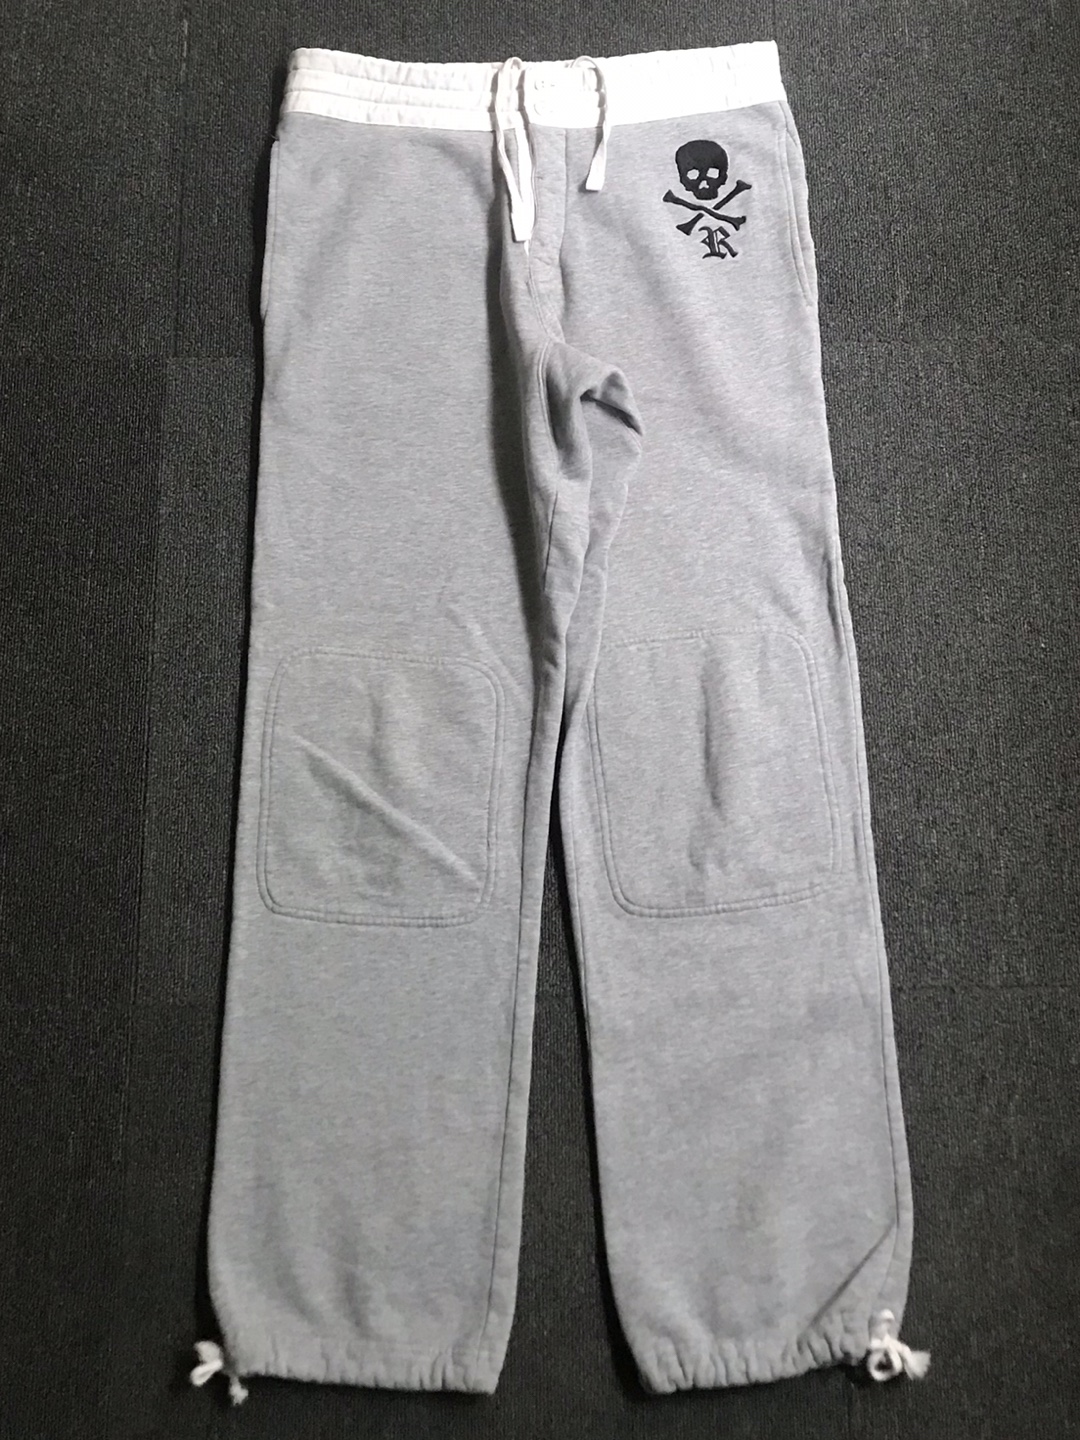 rugby RL embroidered sweatpants with drawstrings (S size,